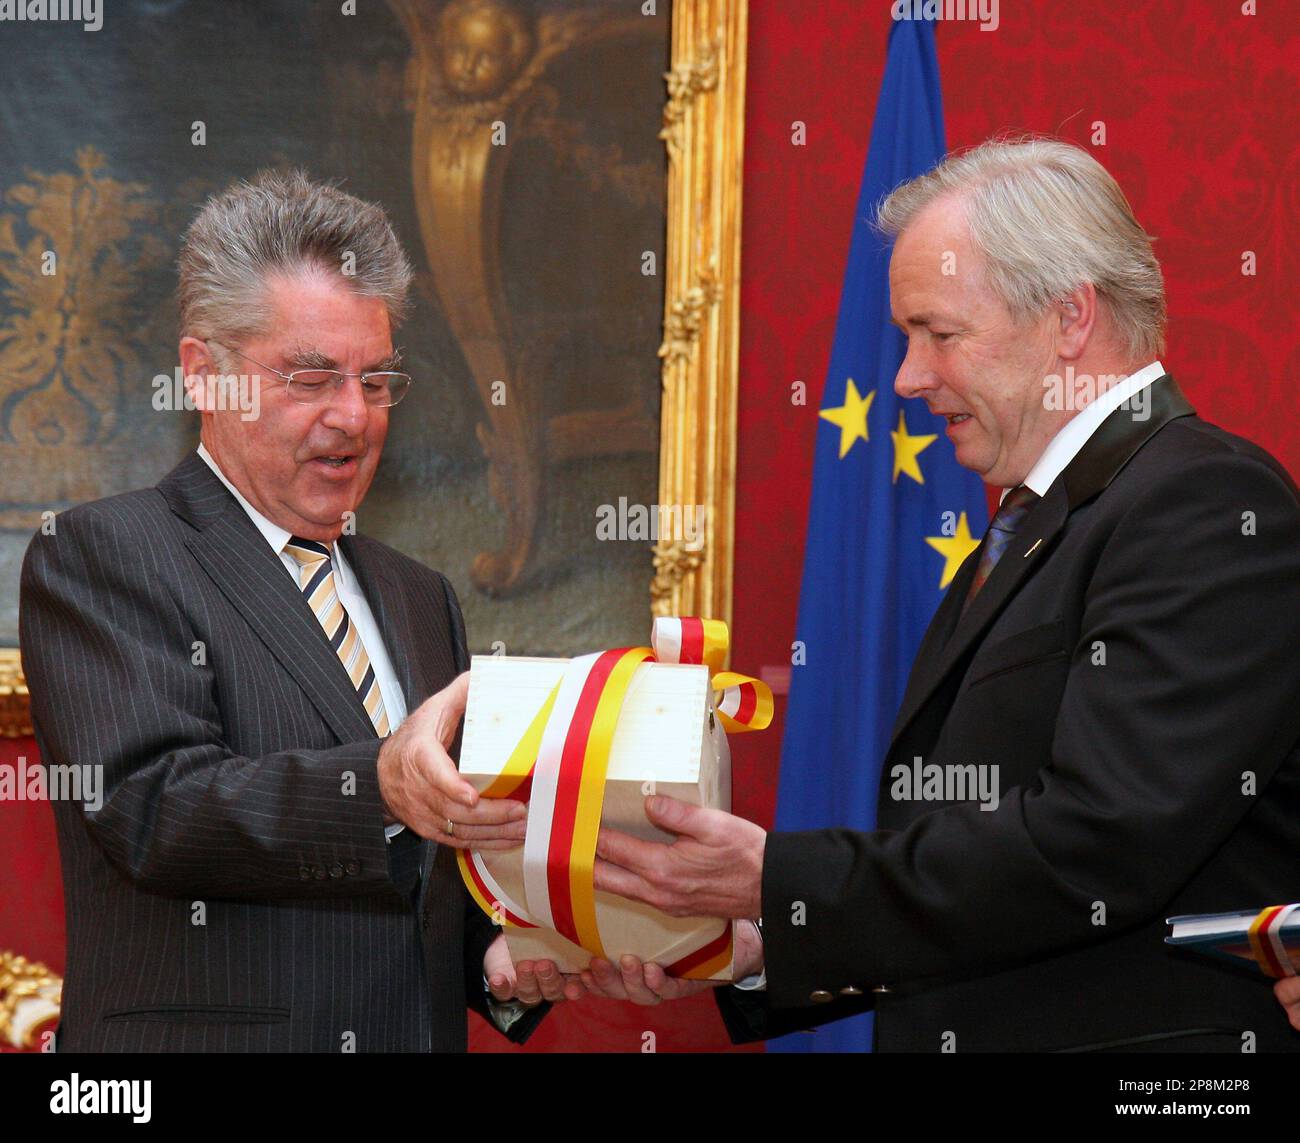 Austrian President Heinz Fischer, left, gets a gift from Gerhard Doerfler, right, the new Governor of Carinthia, before an inauguration ceremony at the Hofburg palace in Vienna, Austria, on Tuesday, April 7, 2009. (AP Photo/Ronald Zak) Stock Photo